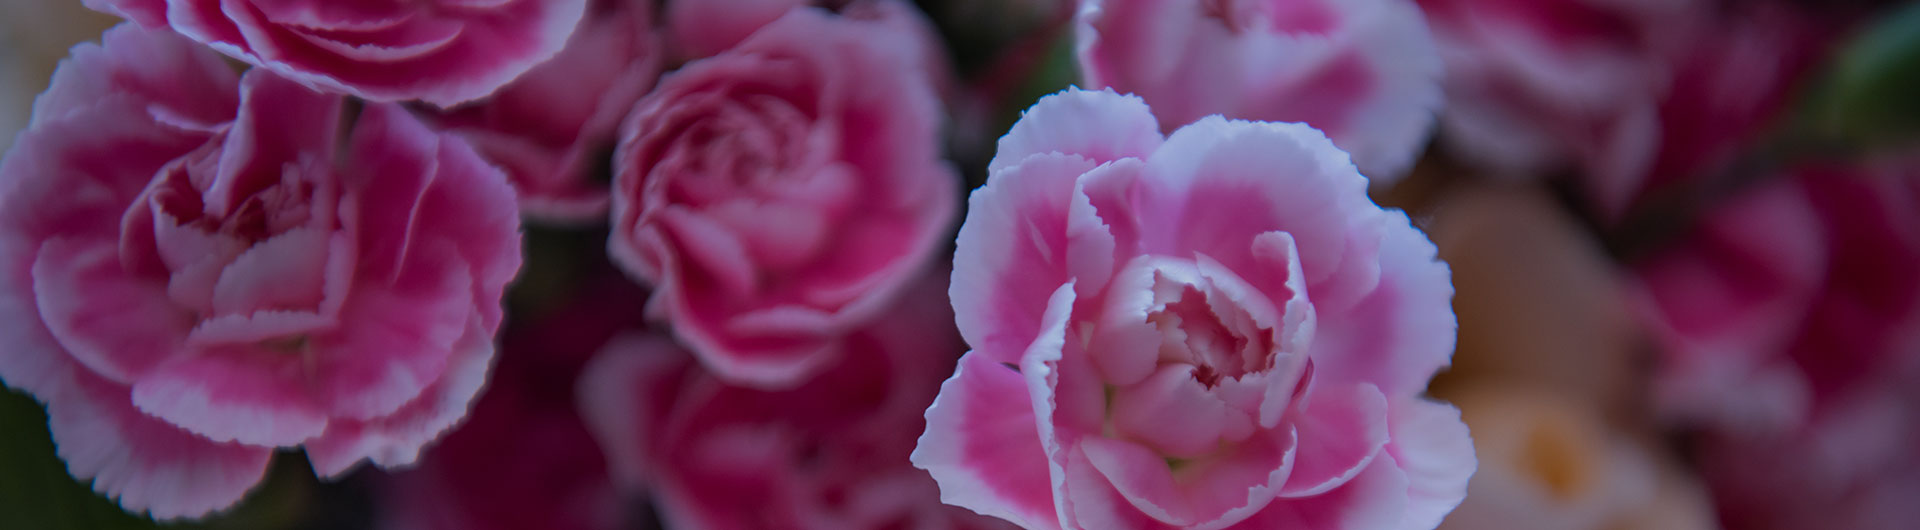 Pink carnation, Ohio's state flower.